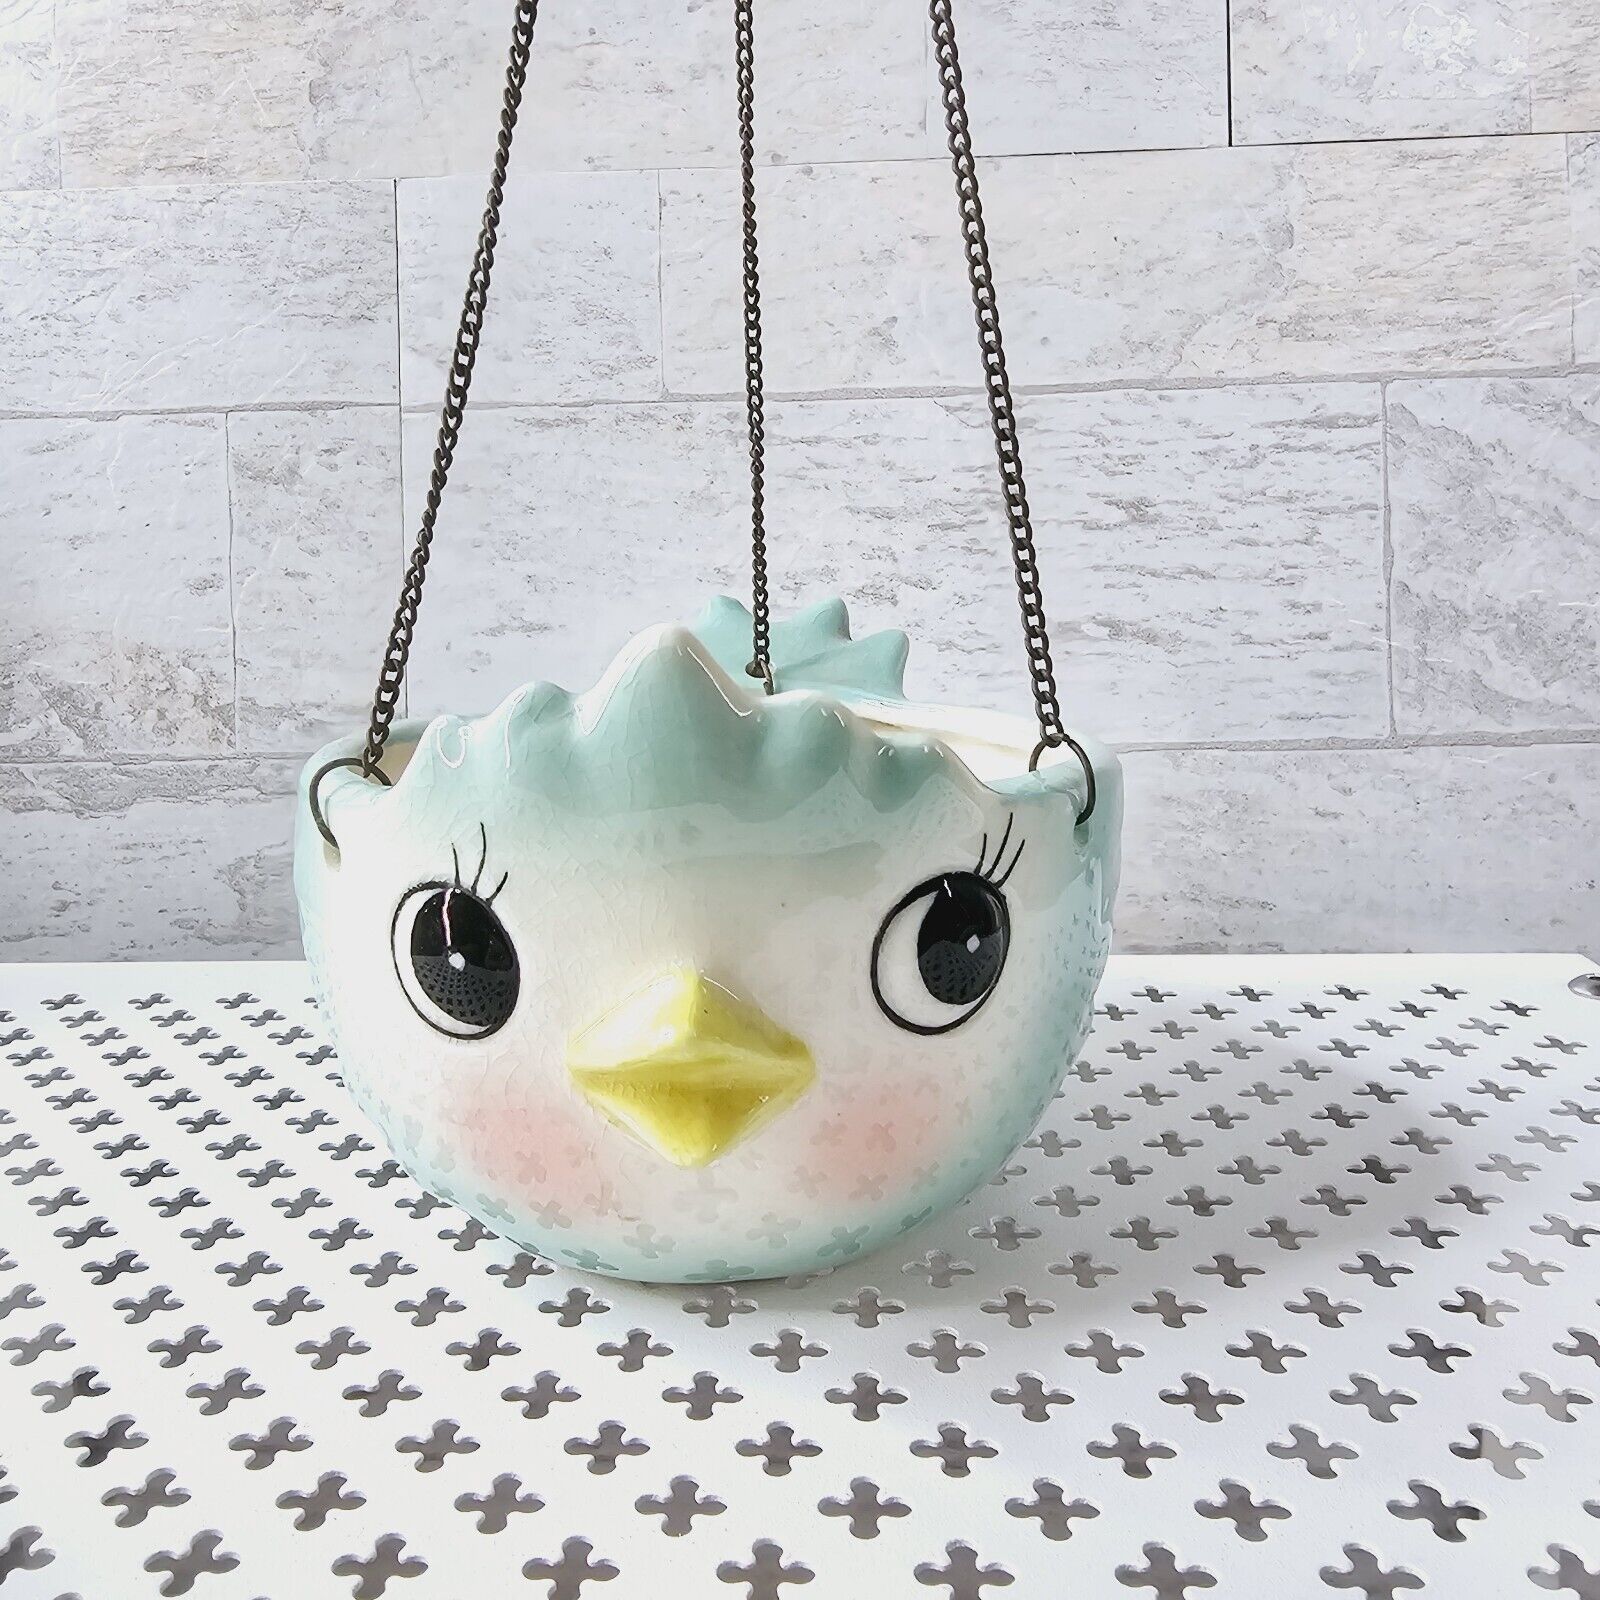 HTF Holt Howard 1958 Blue Bird Hanging Planter Candle Holder With Chain RARE